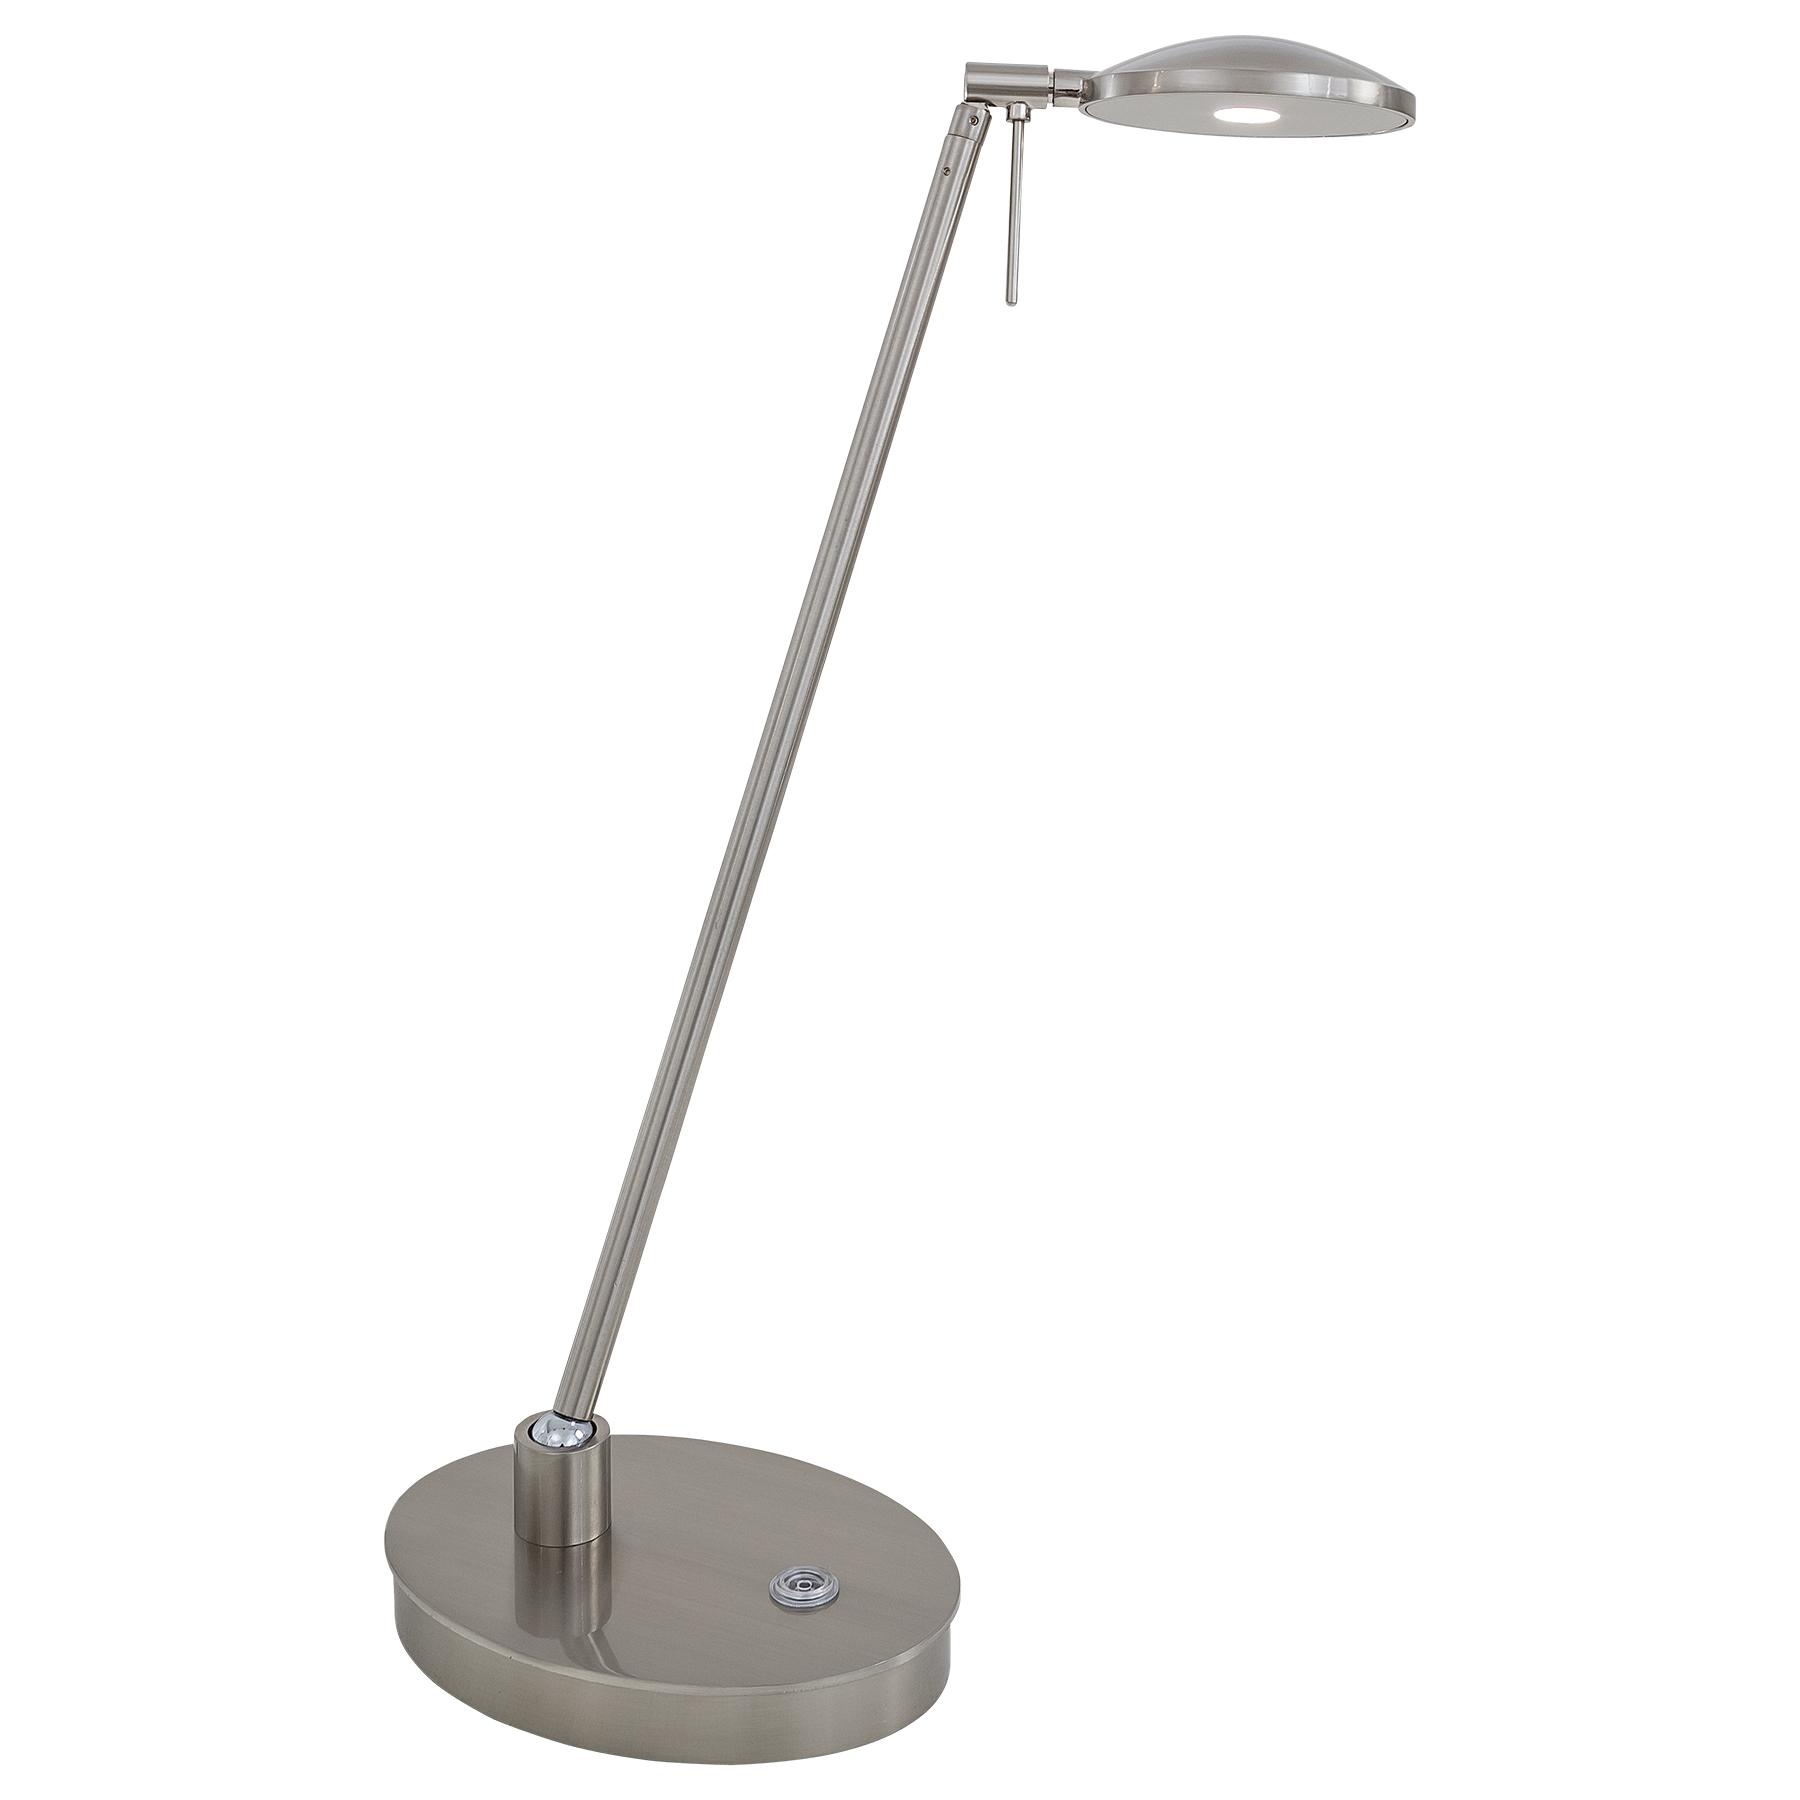 Georges Reading Room LED Round Head Desk Lamp by George Kovacs P4336-084  GKV201544